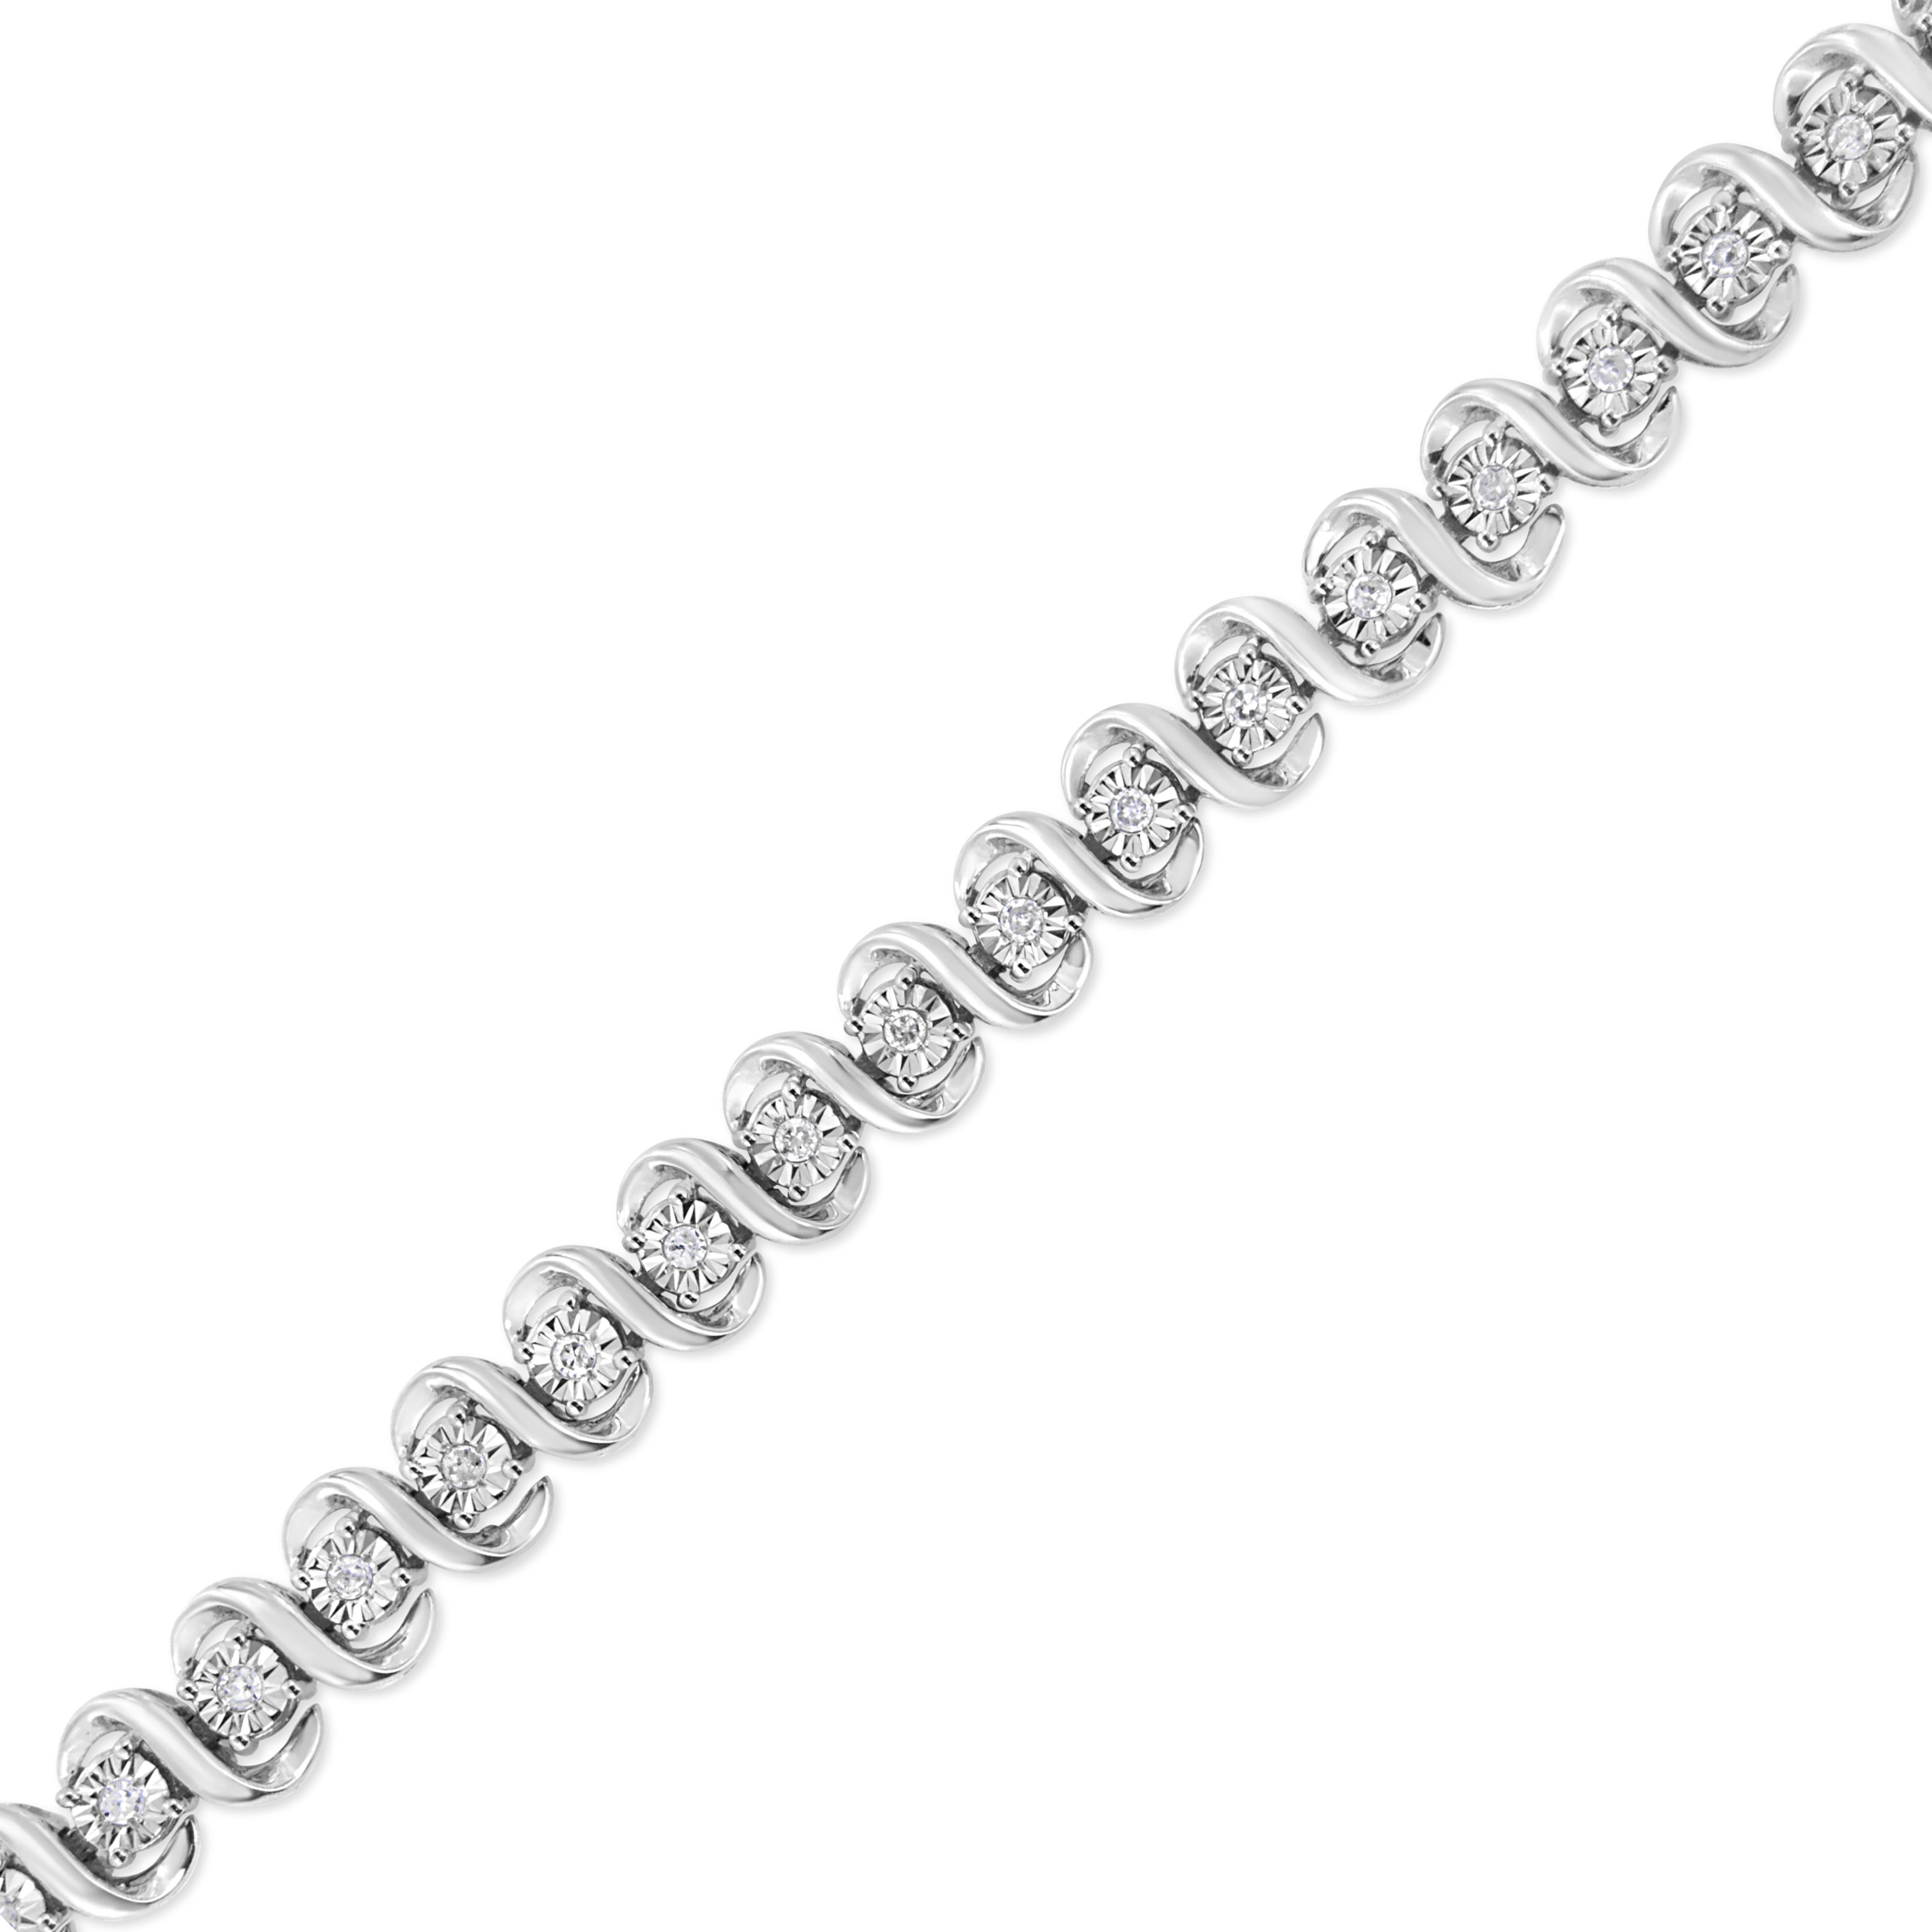 Add a touch of glamour to your everyday wear with this beautiful 1/2 cttw diamond bracelet. This piece has an elegant design of silver 